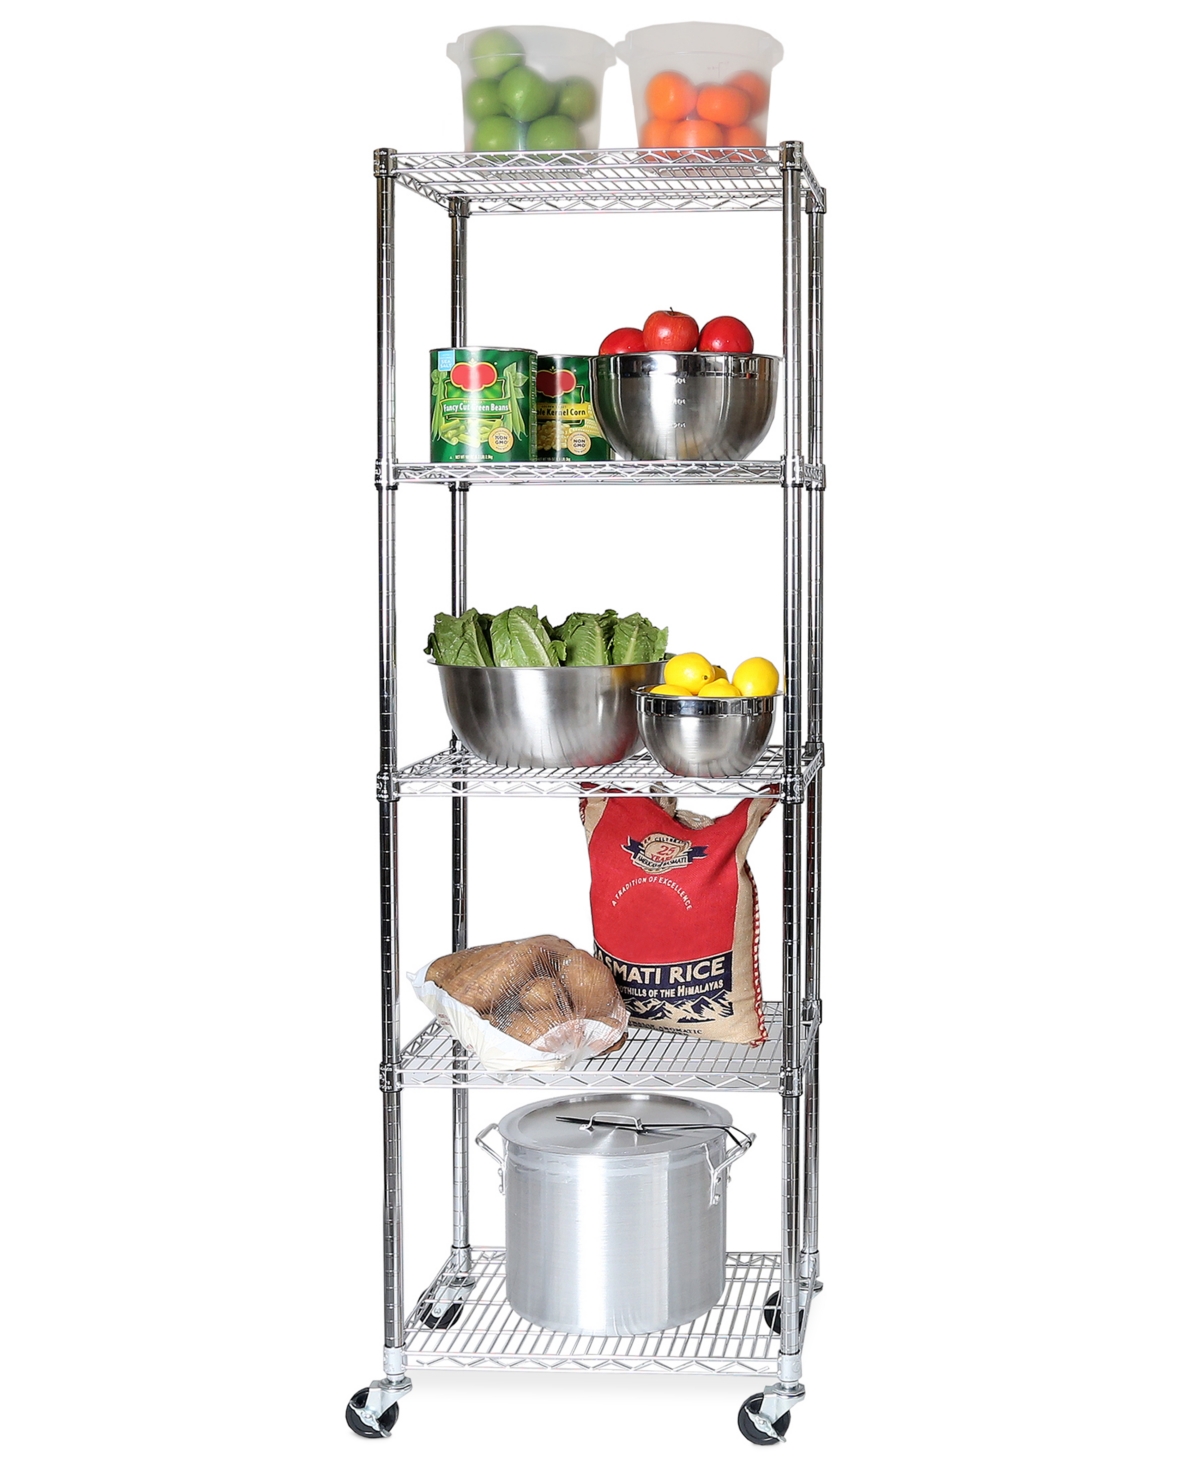 UltraDurable Commercial-Grade 5-Tier Nsf-Certified Steel Wire Wheeled Shelving - Chrome